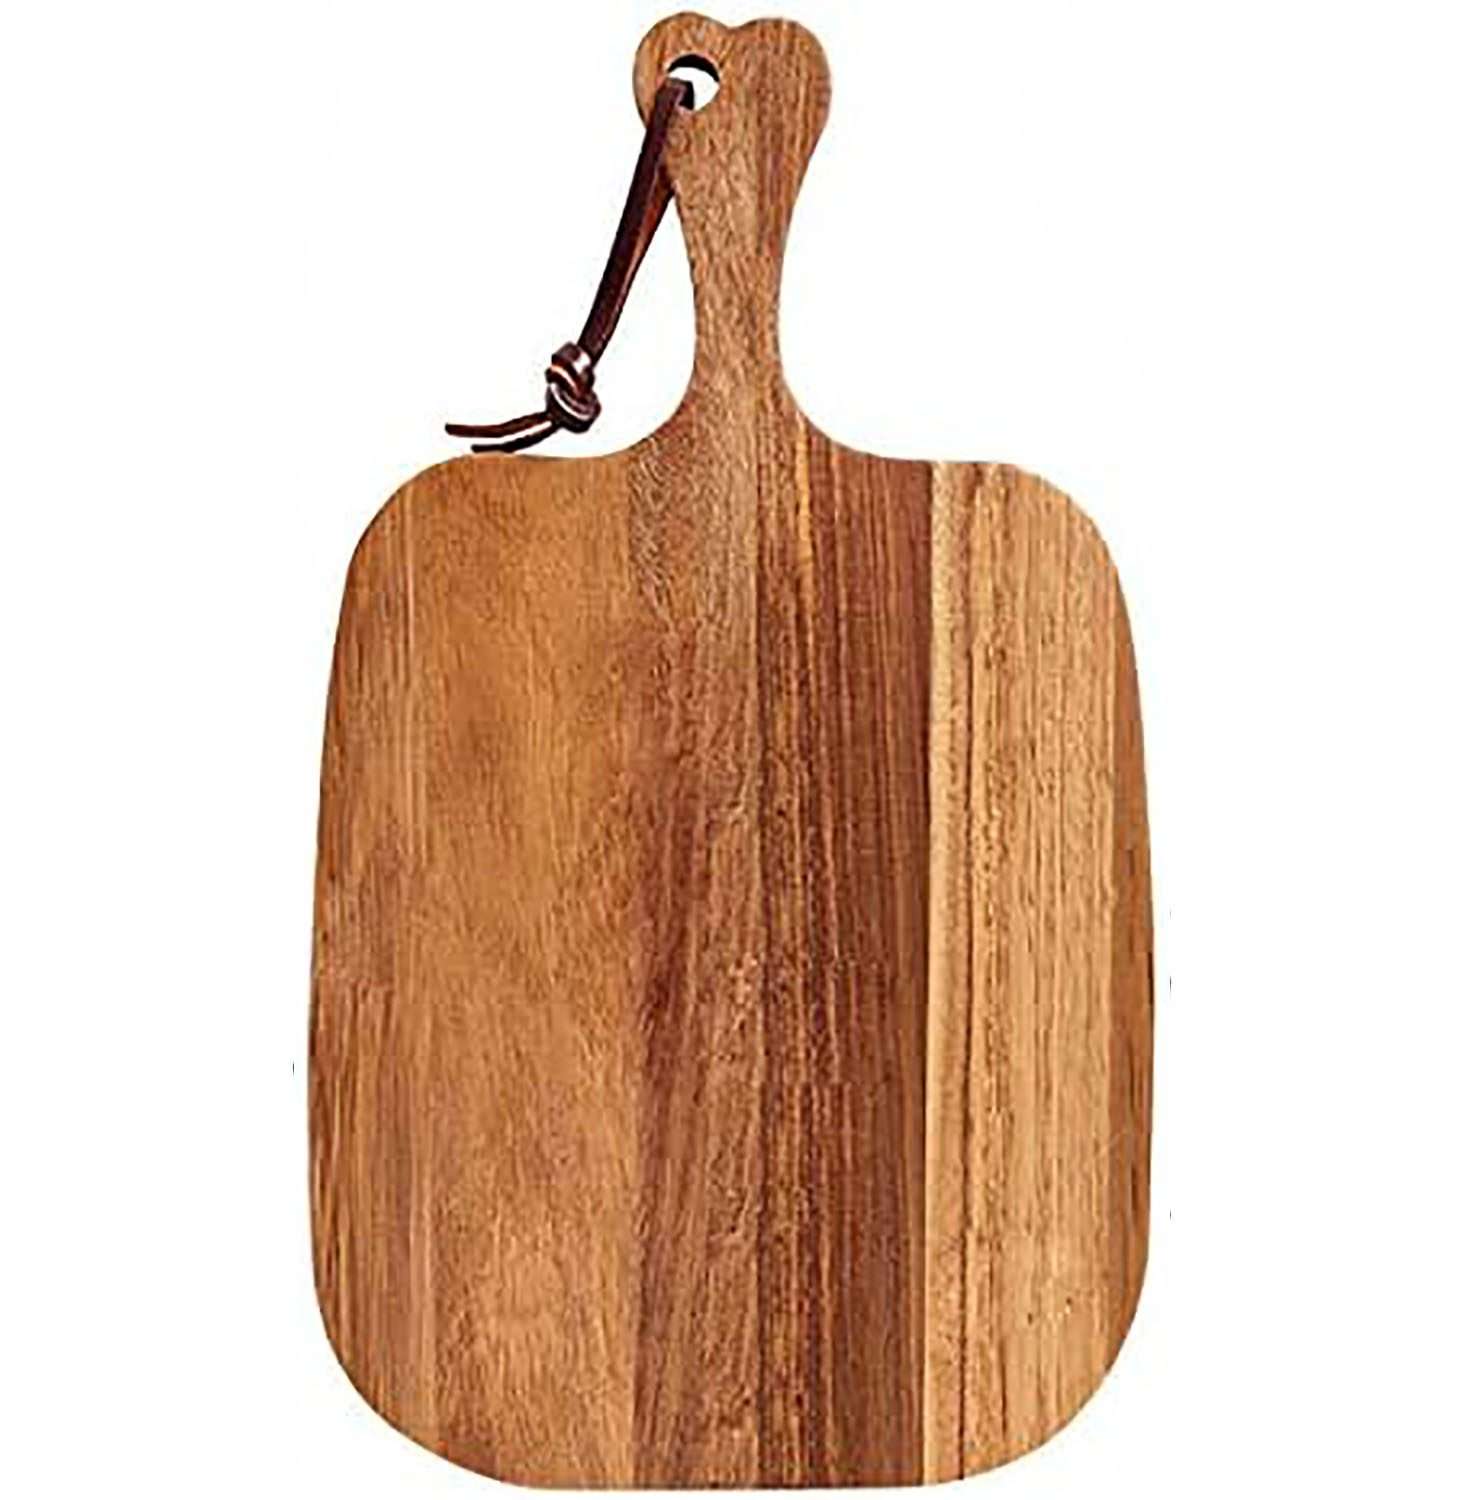 Acacia Wood Cutting Board With Handle | Hardwood Small Chopping Board for Kitchen | Wooden Charcuterie Board- Vegetables, Fruits, Bread, Cheese, Crackers Serving Platter